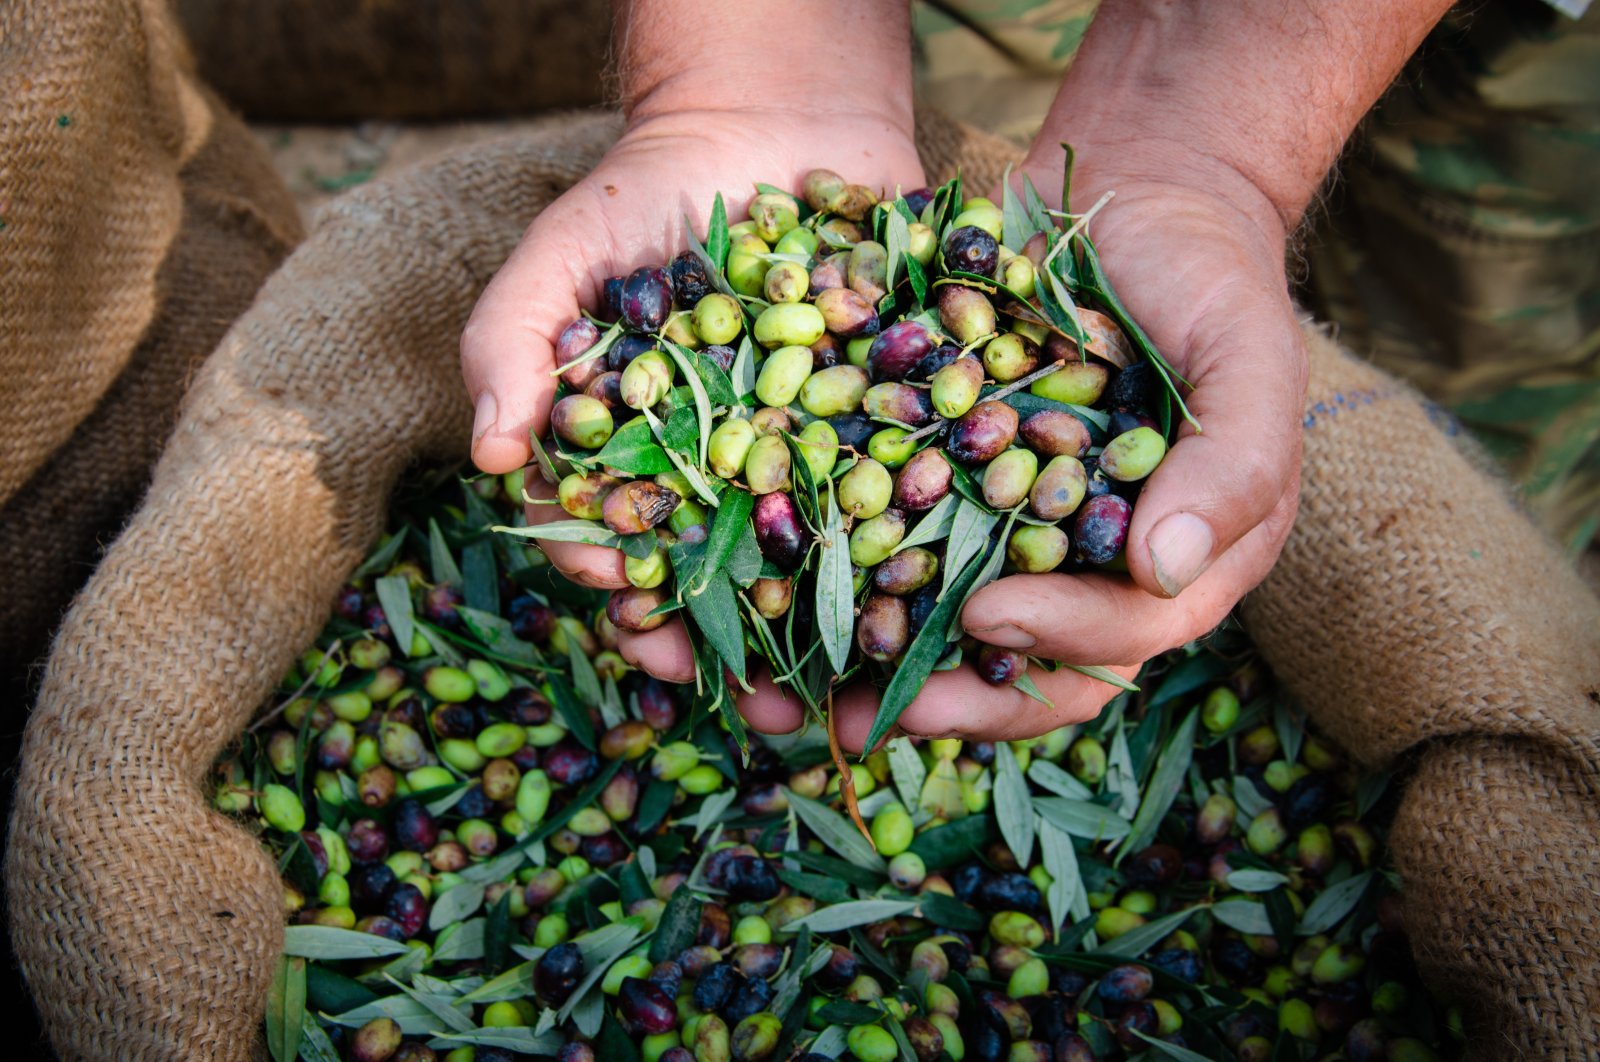 Higher in antioxidants and lightly processed, the oil from pressed olives is closer to nature than vegetable or seed counterparts, which usually see nutrients and taste diminished by processing and blending. (Shutterstock Photo)